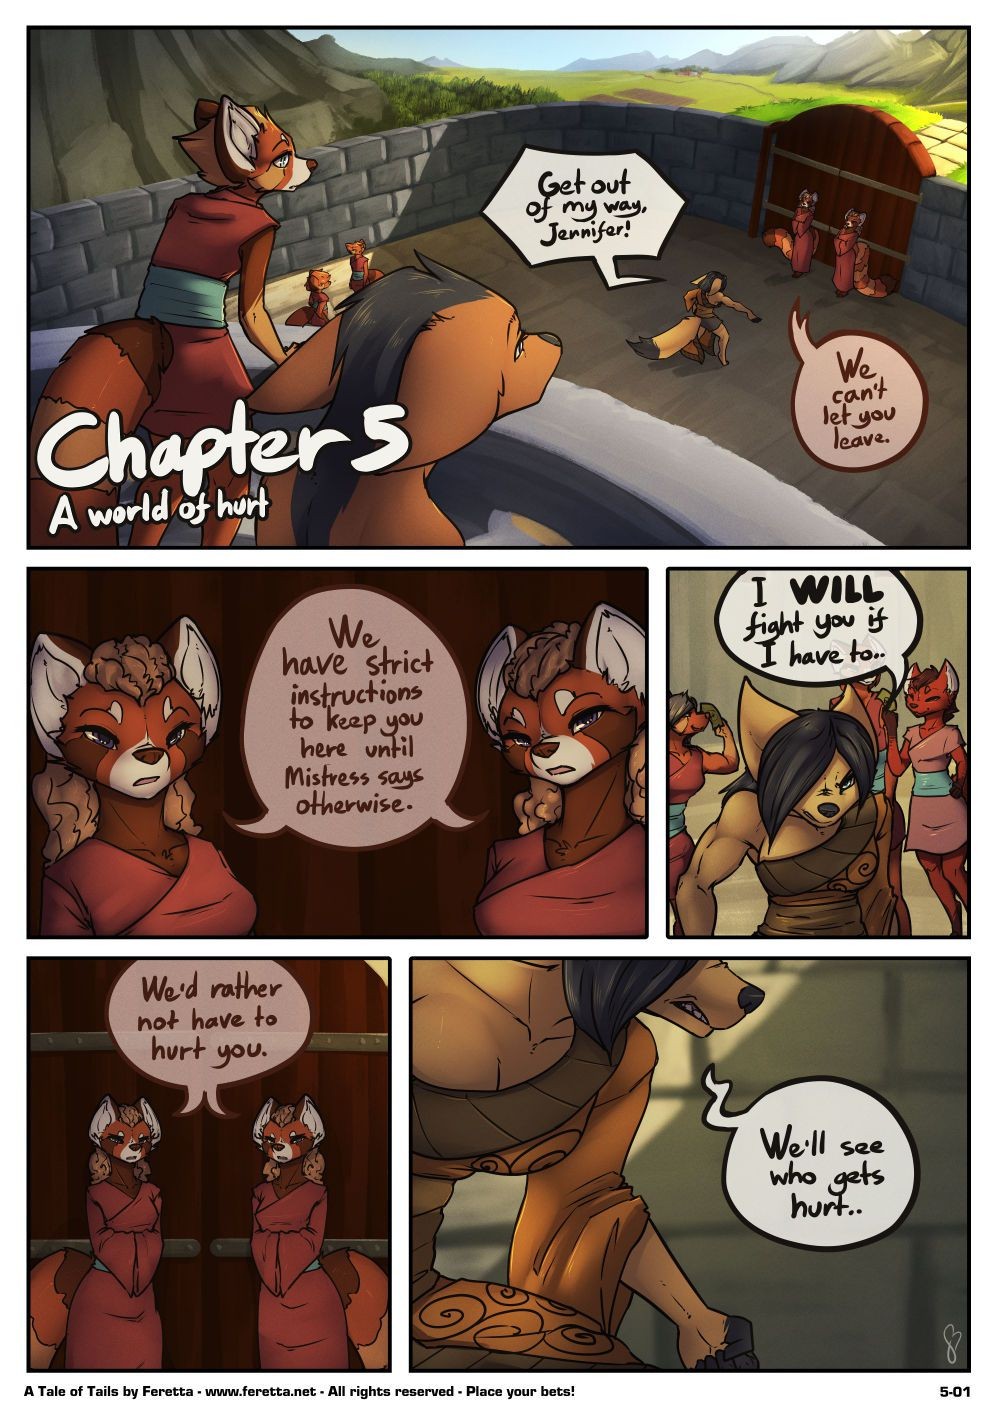 Fuck Com [Feretta] A Tale Of Tails: Chapter 5 - A World Of Hurt (ongoing) Cum Swallowing